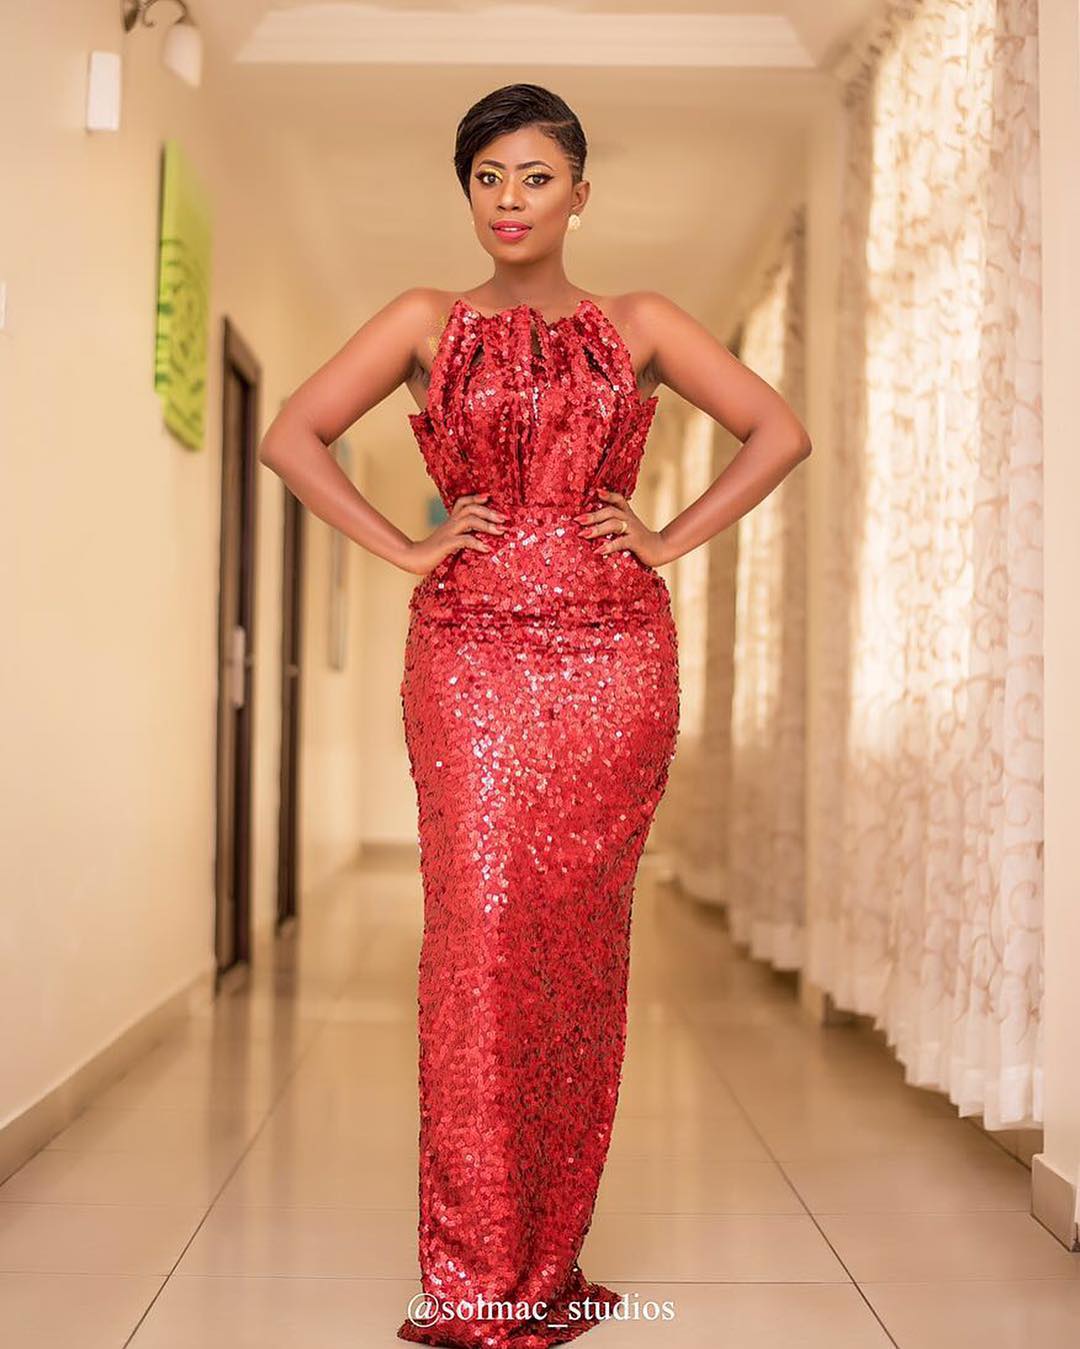 Selorm Galley-Fiawoo Just Blew Us Away With Her Glamorous Shimmering Gown -  FPN